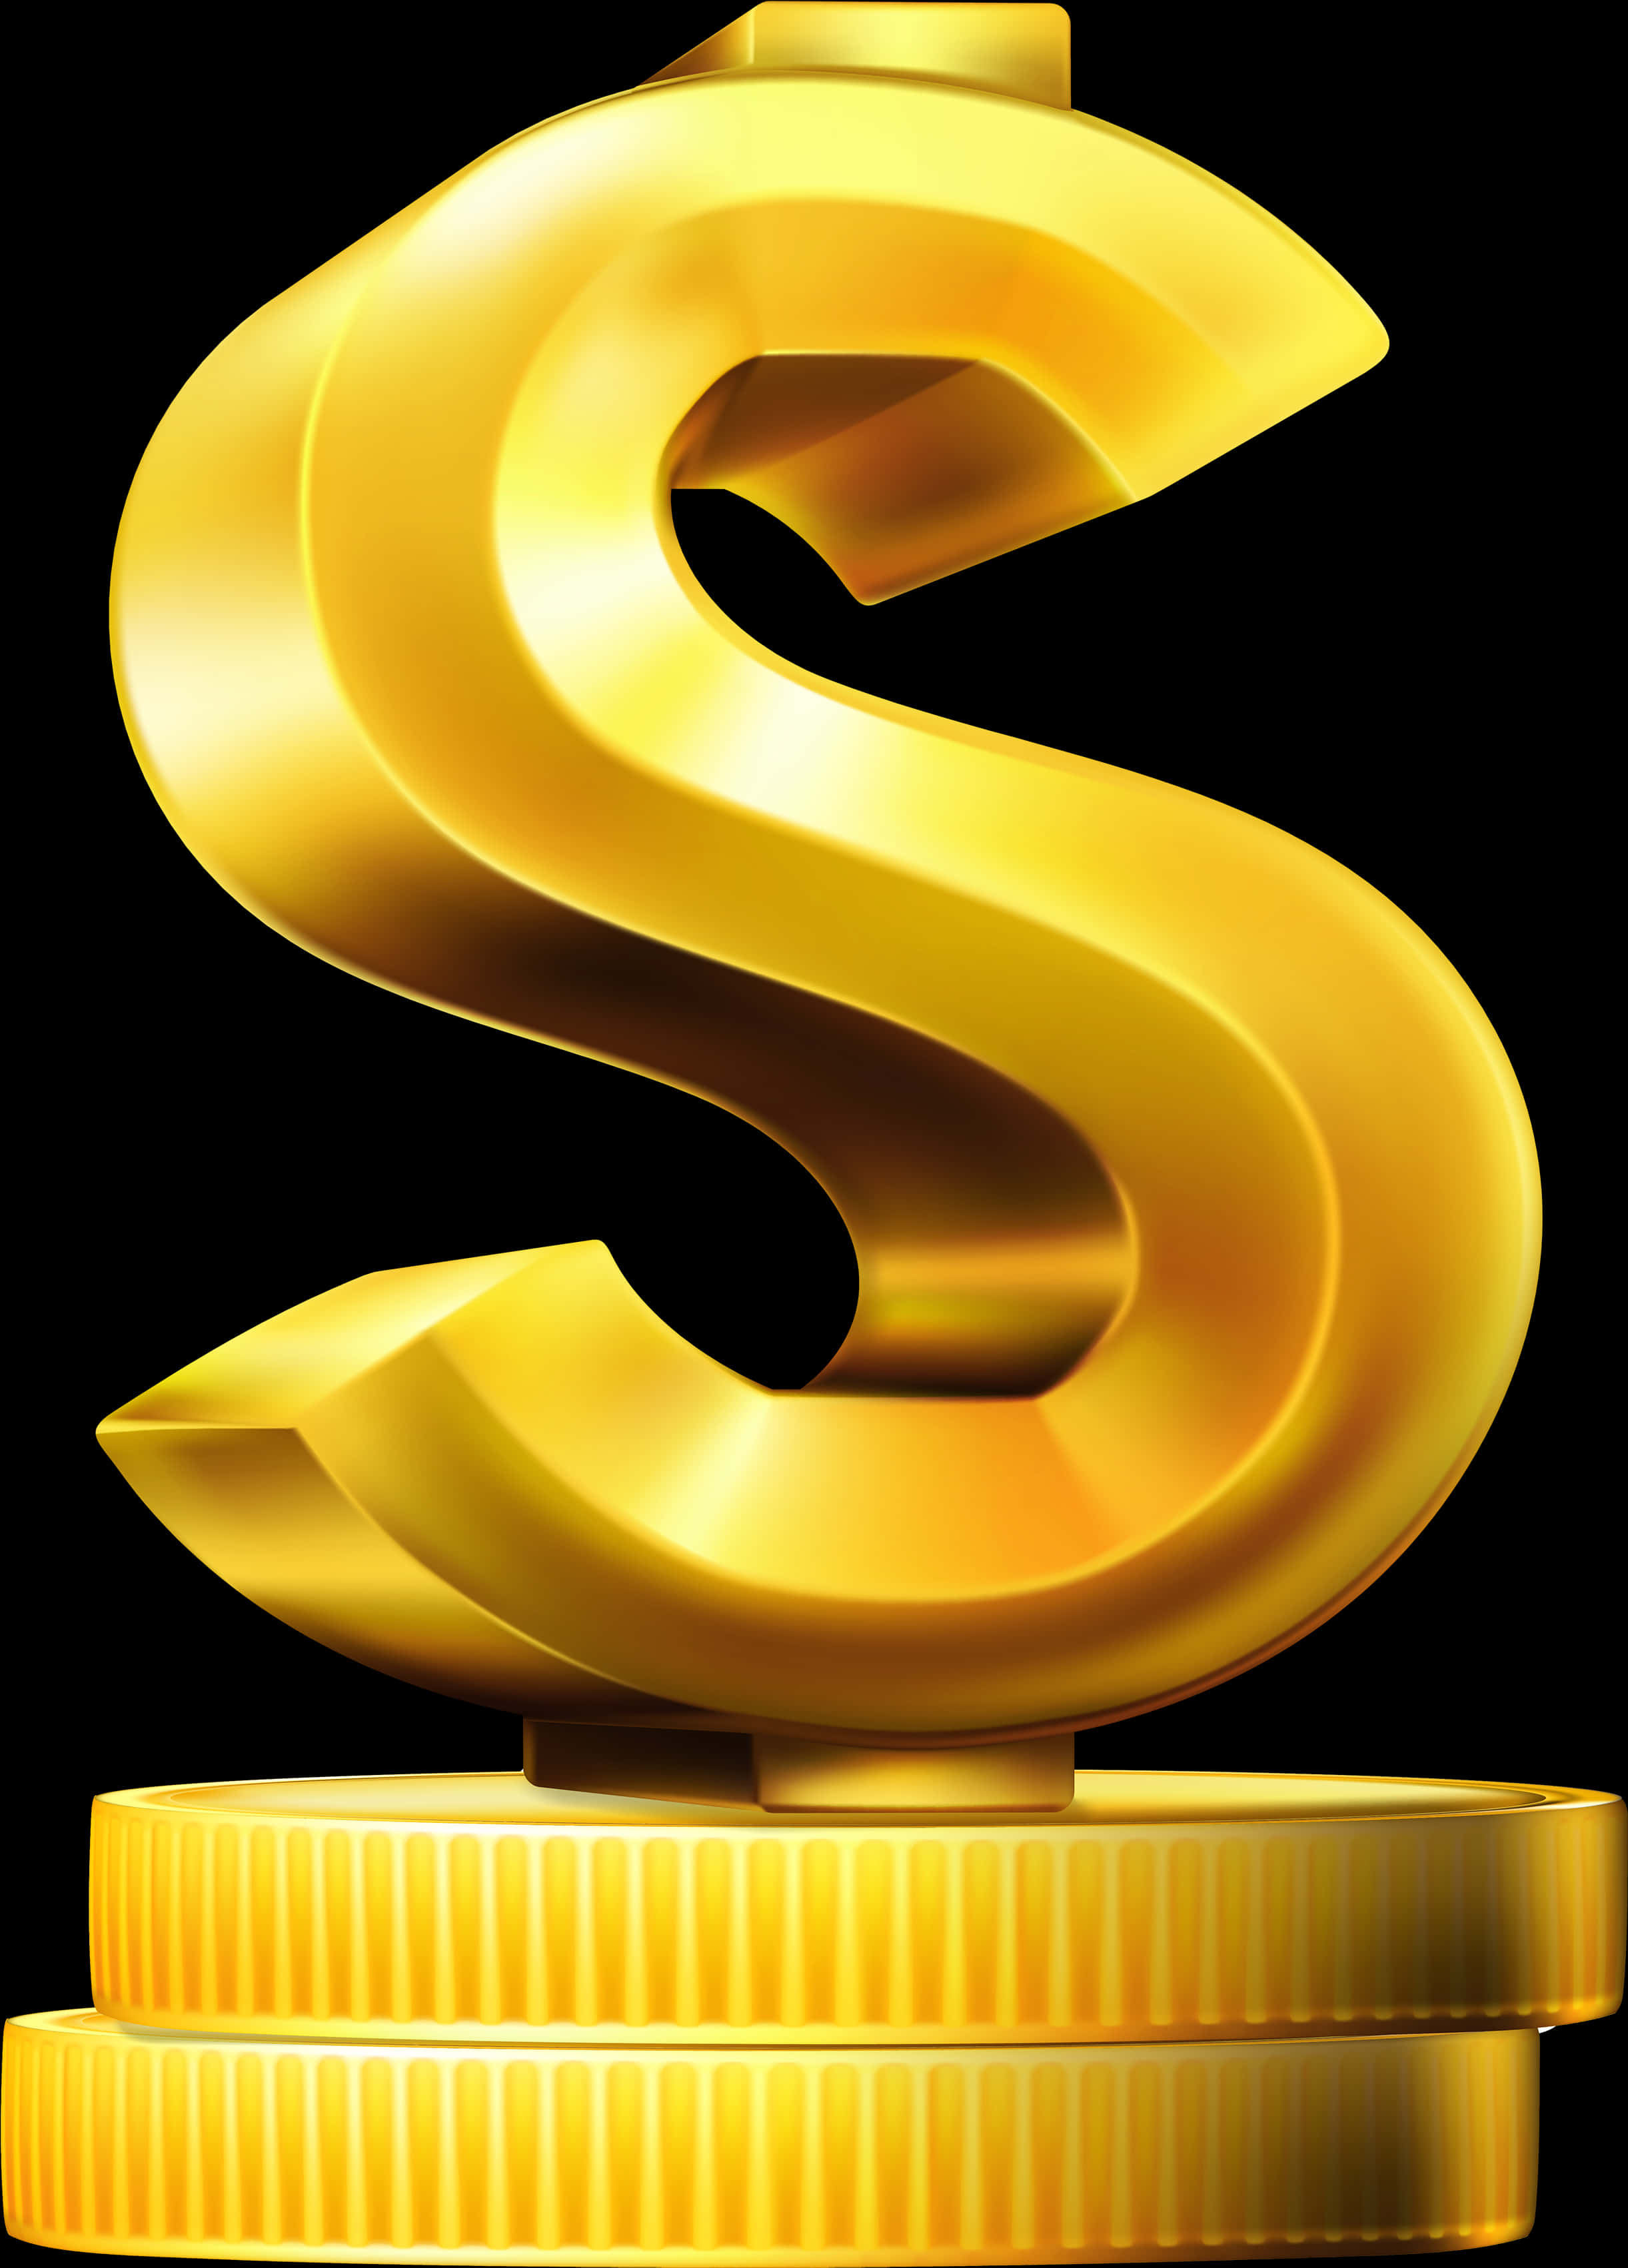 Gold Coins And Dollar Sign Clipart